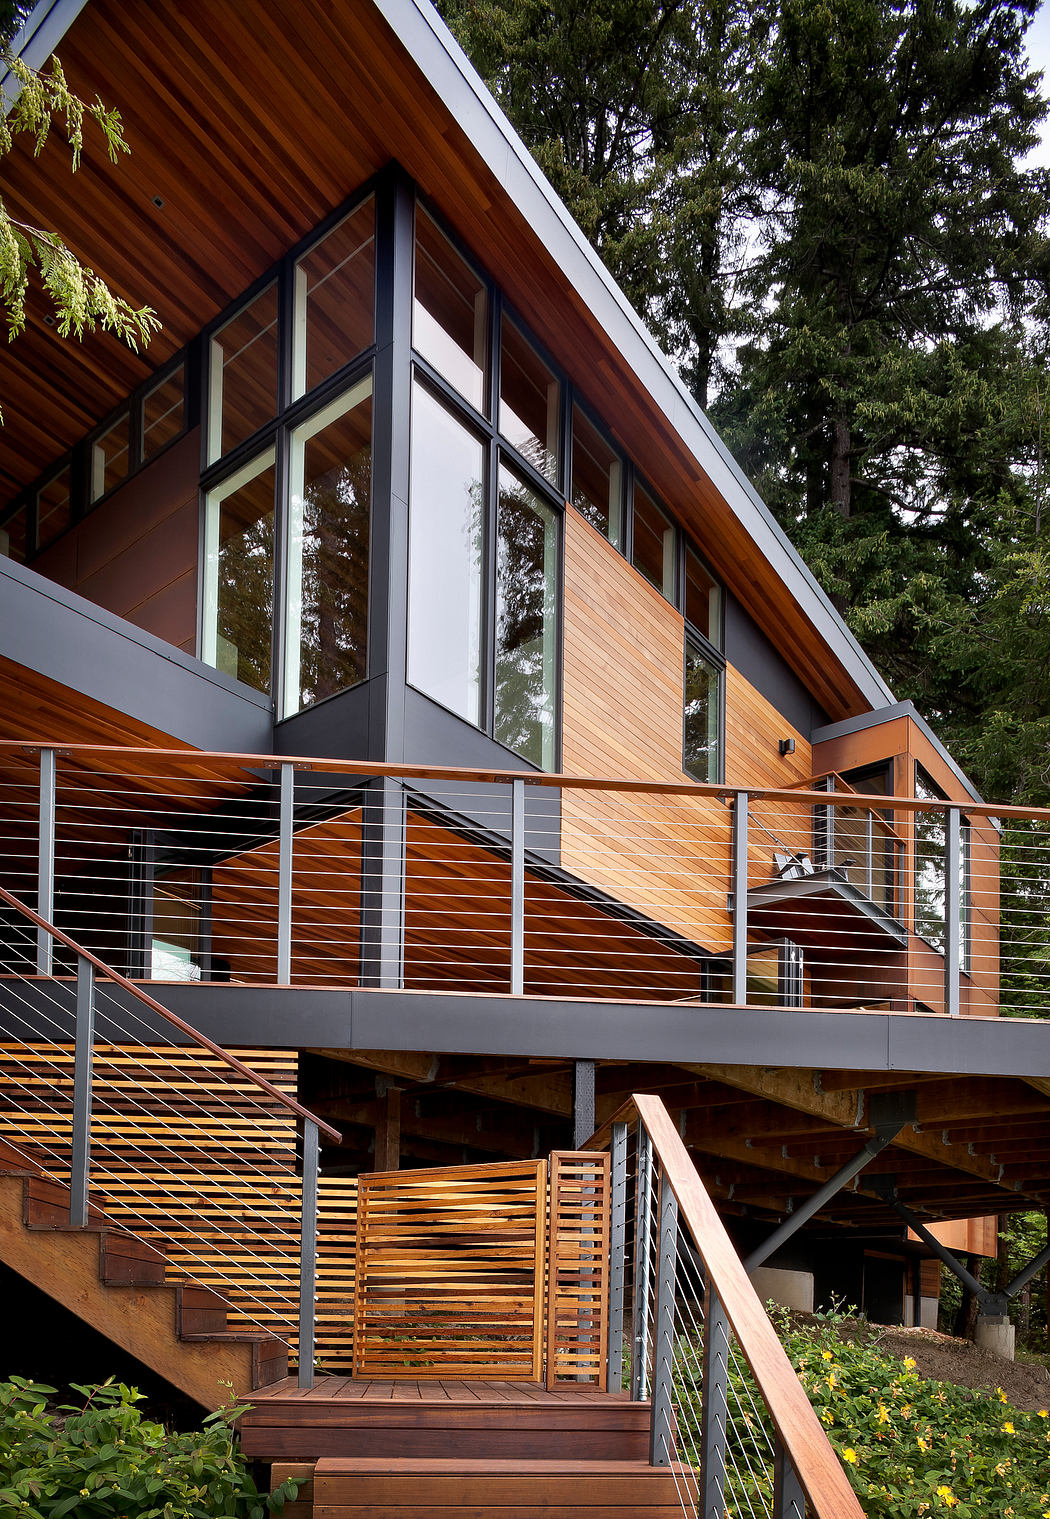 Herron Island Cabin: A Sanctuary Amidst Nature by First Lamp Architects